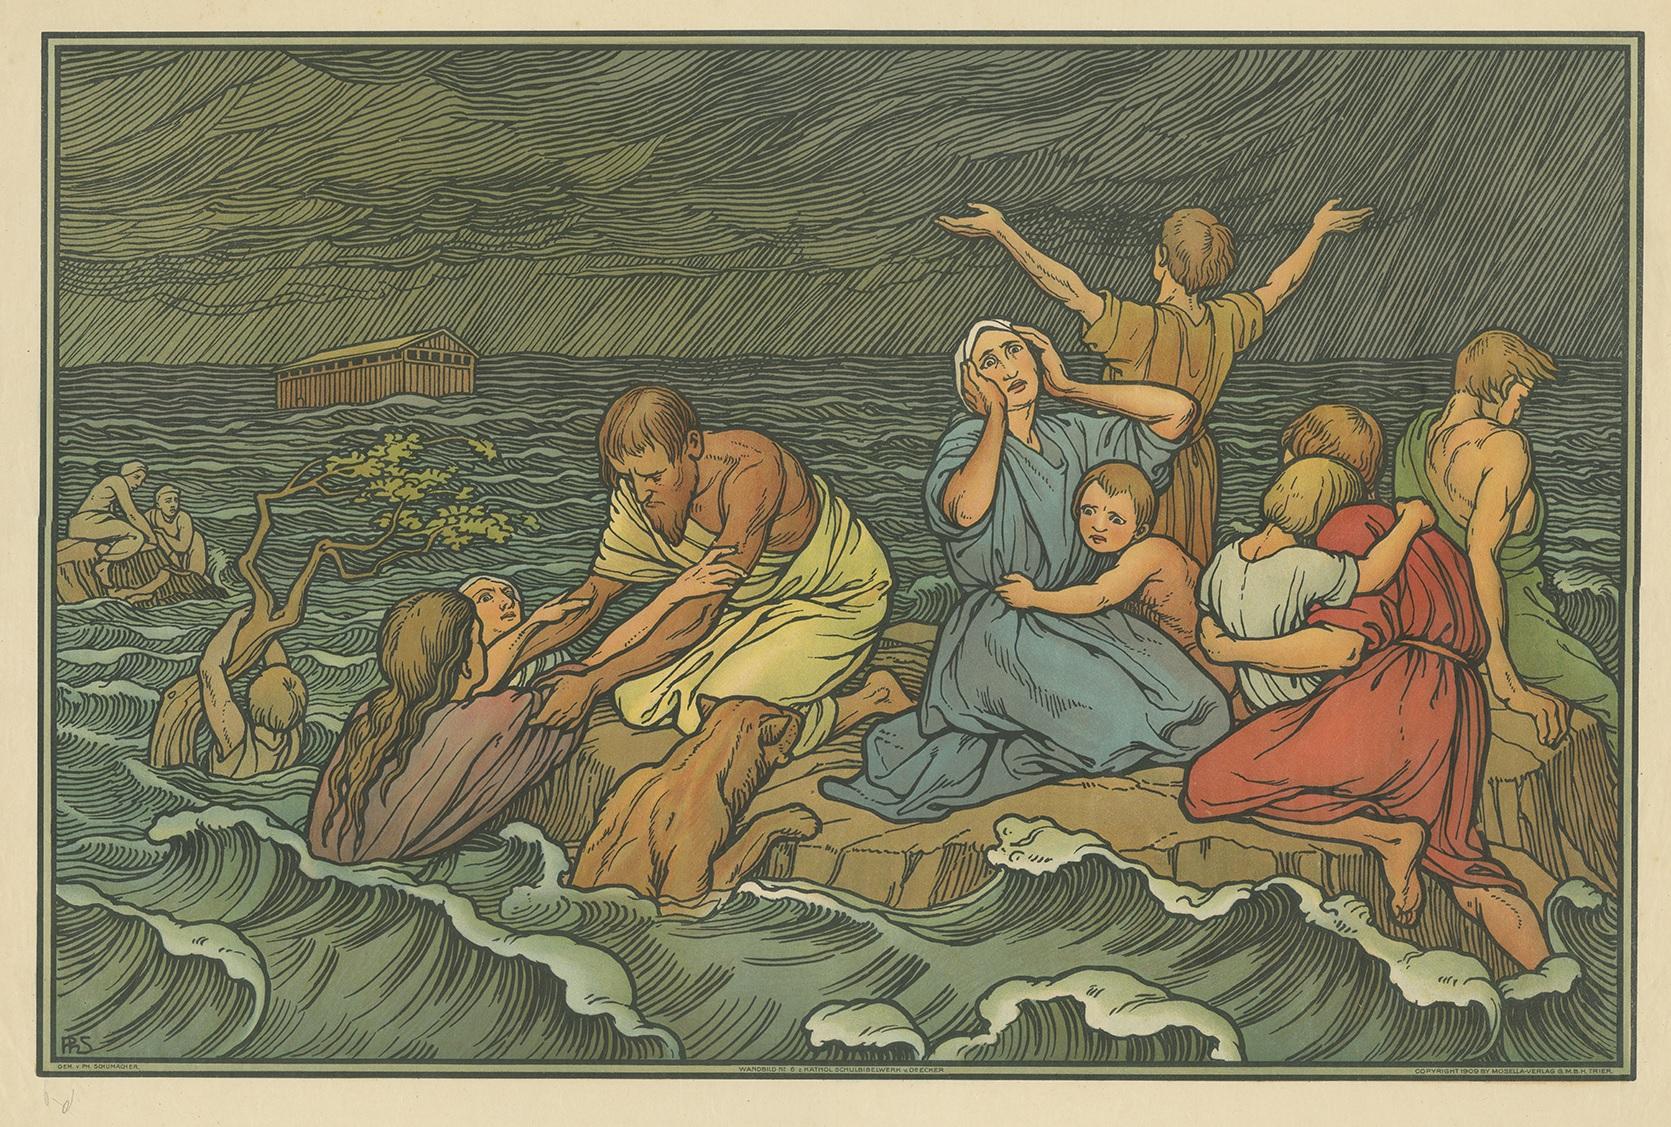 Large antique print of the Flood or Deluge. Published by Mosella-Verlag, 1913. This print originates from a series titled 'Kathol. Schulbibelwerk von Dr. Ecker'.